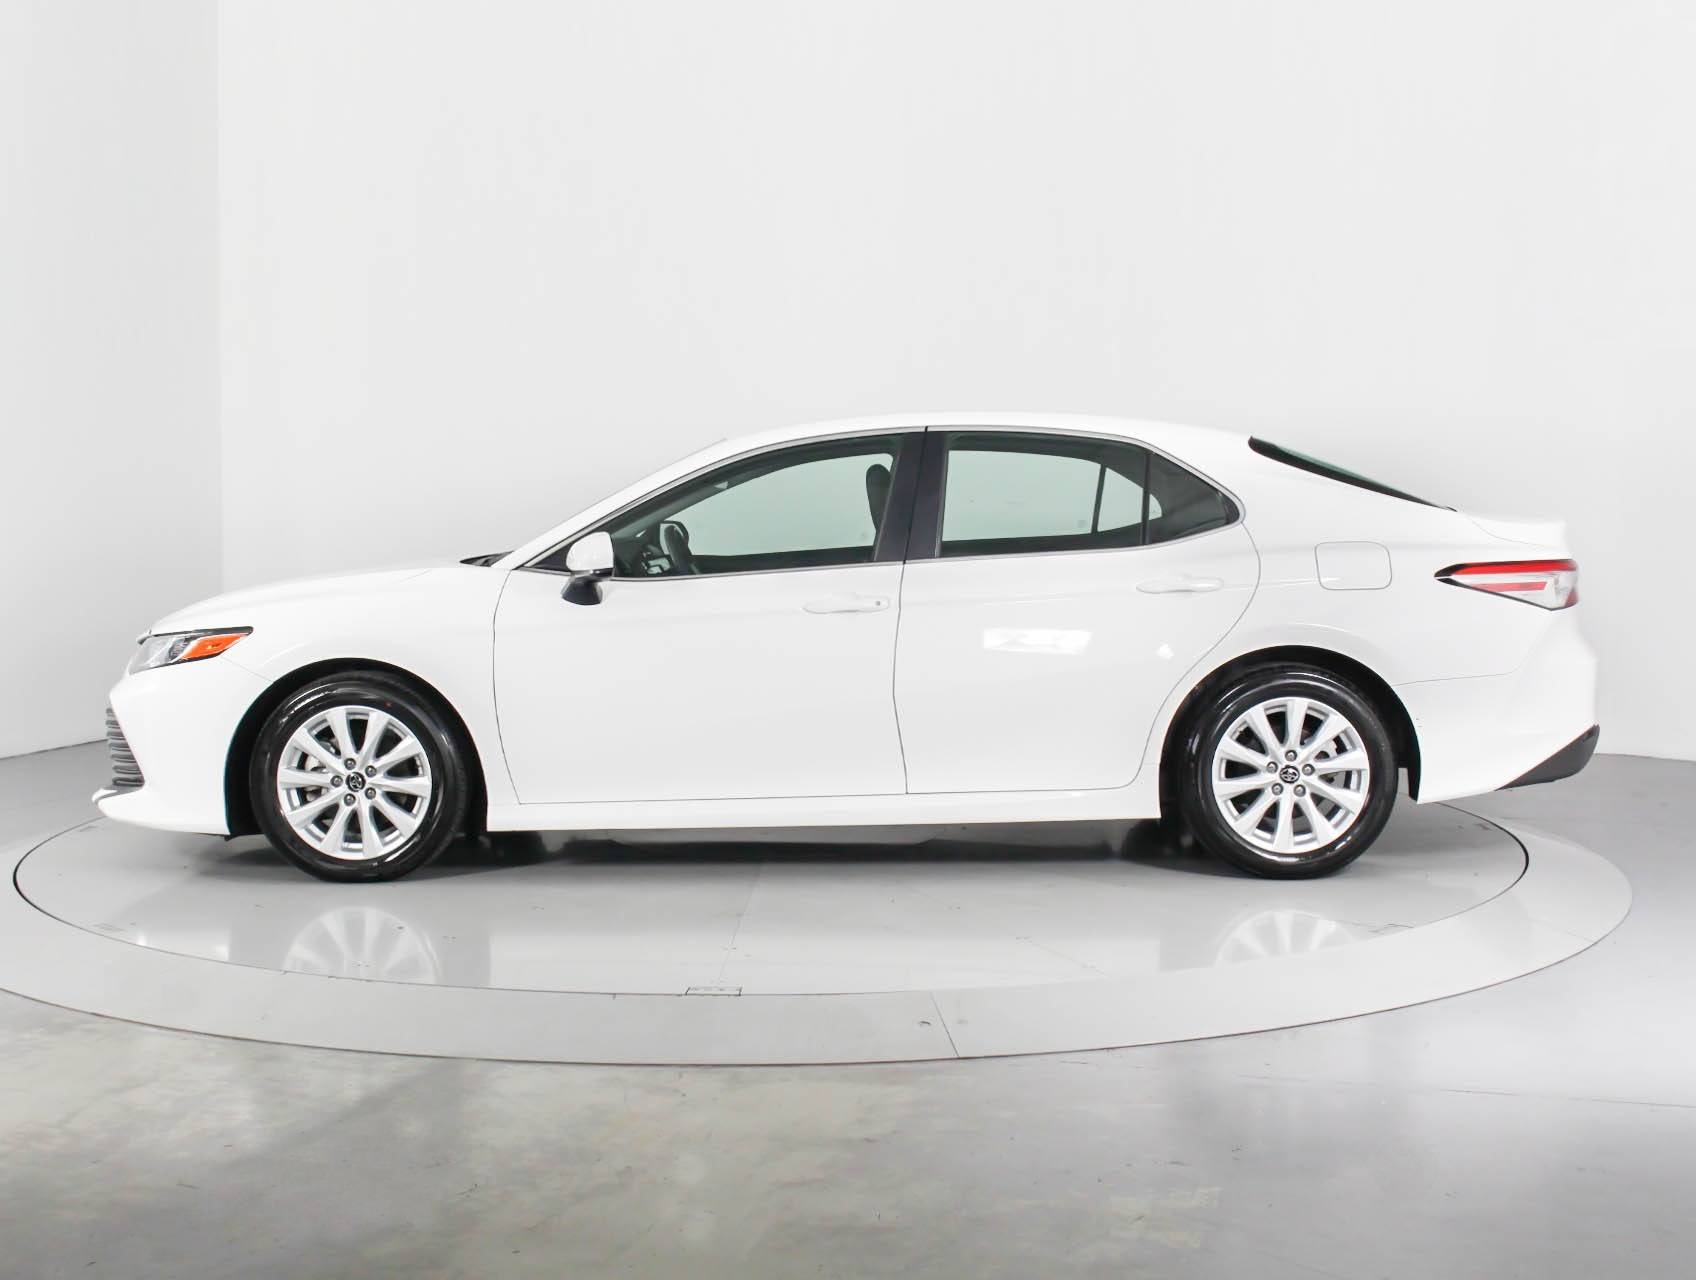 Florida Fine Cars - Used TOYOTA CAMRY 2018 WEST PALM Le